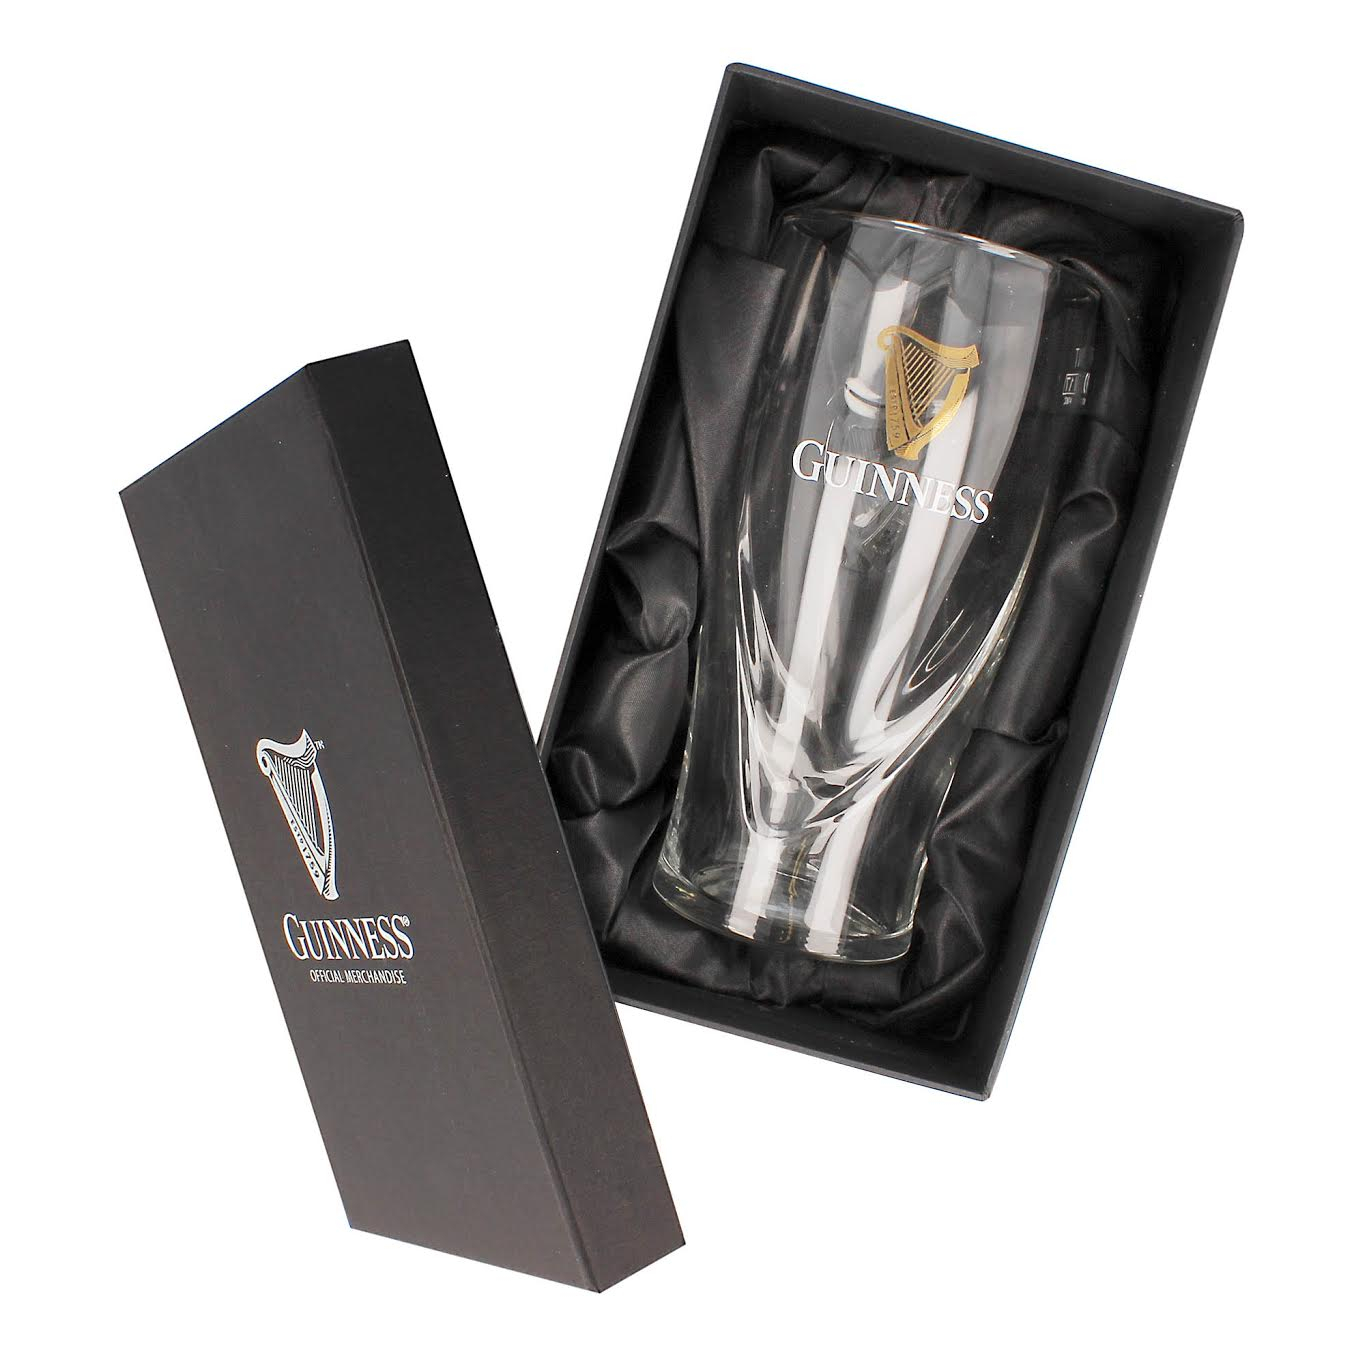 Guinness Engraved Pint Glass happy Father's Day Includes Premium Gift Box 